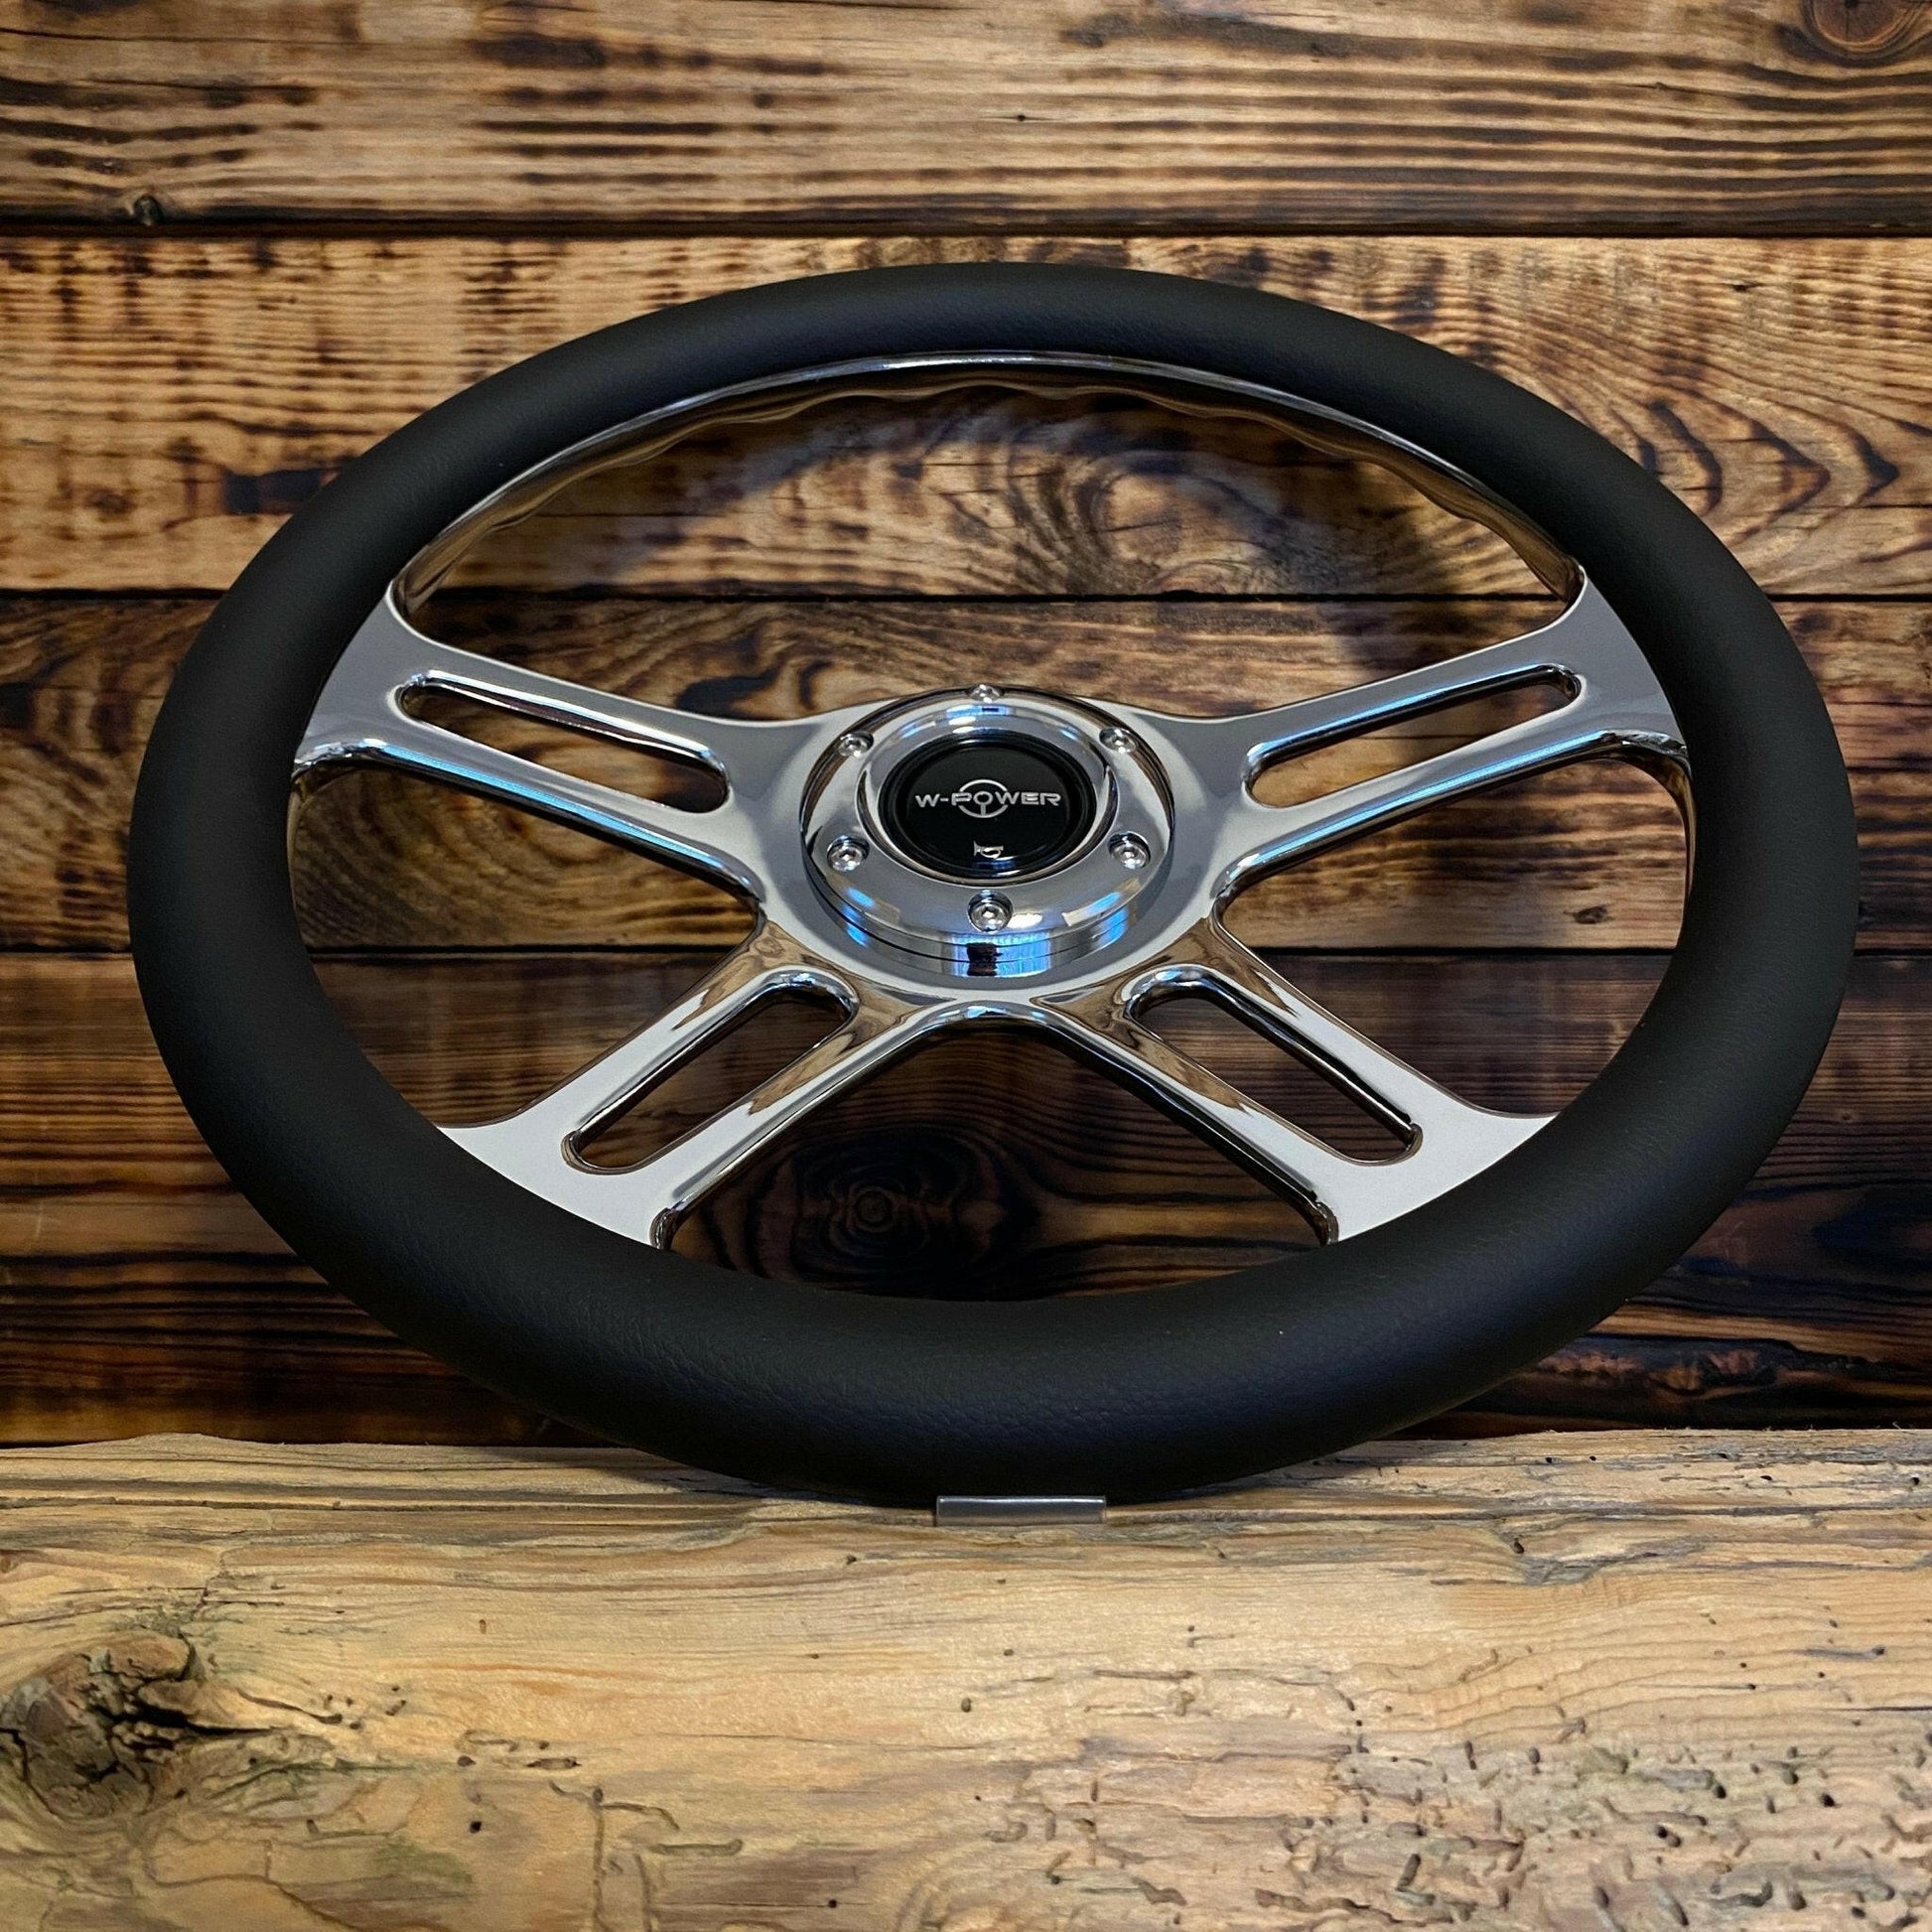 High-quality for superior grip and style - Punk Wheels